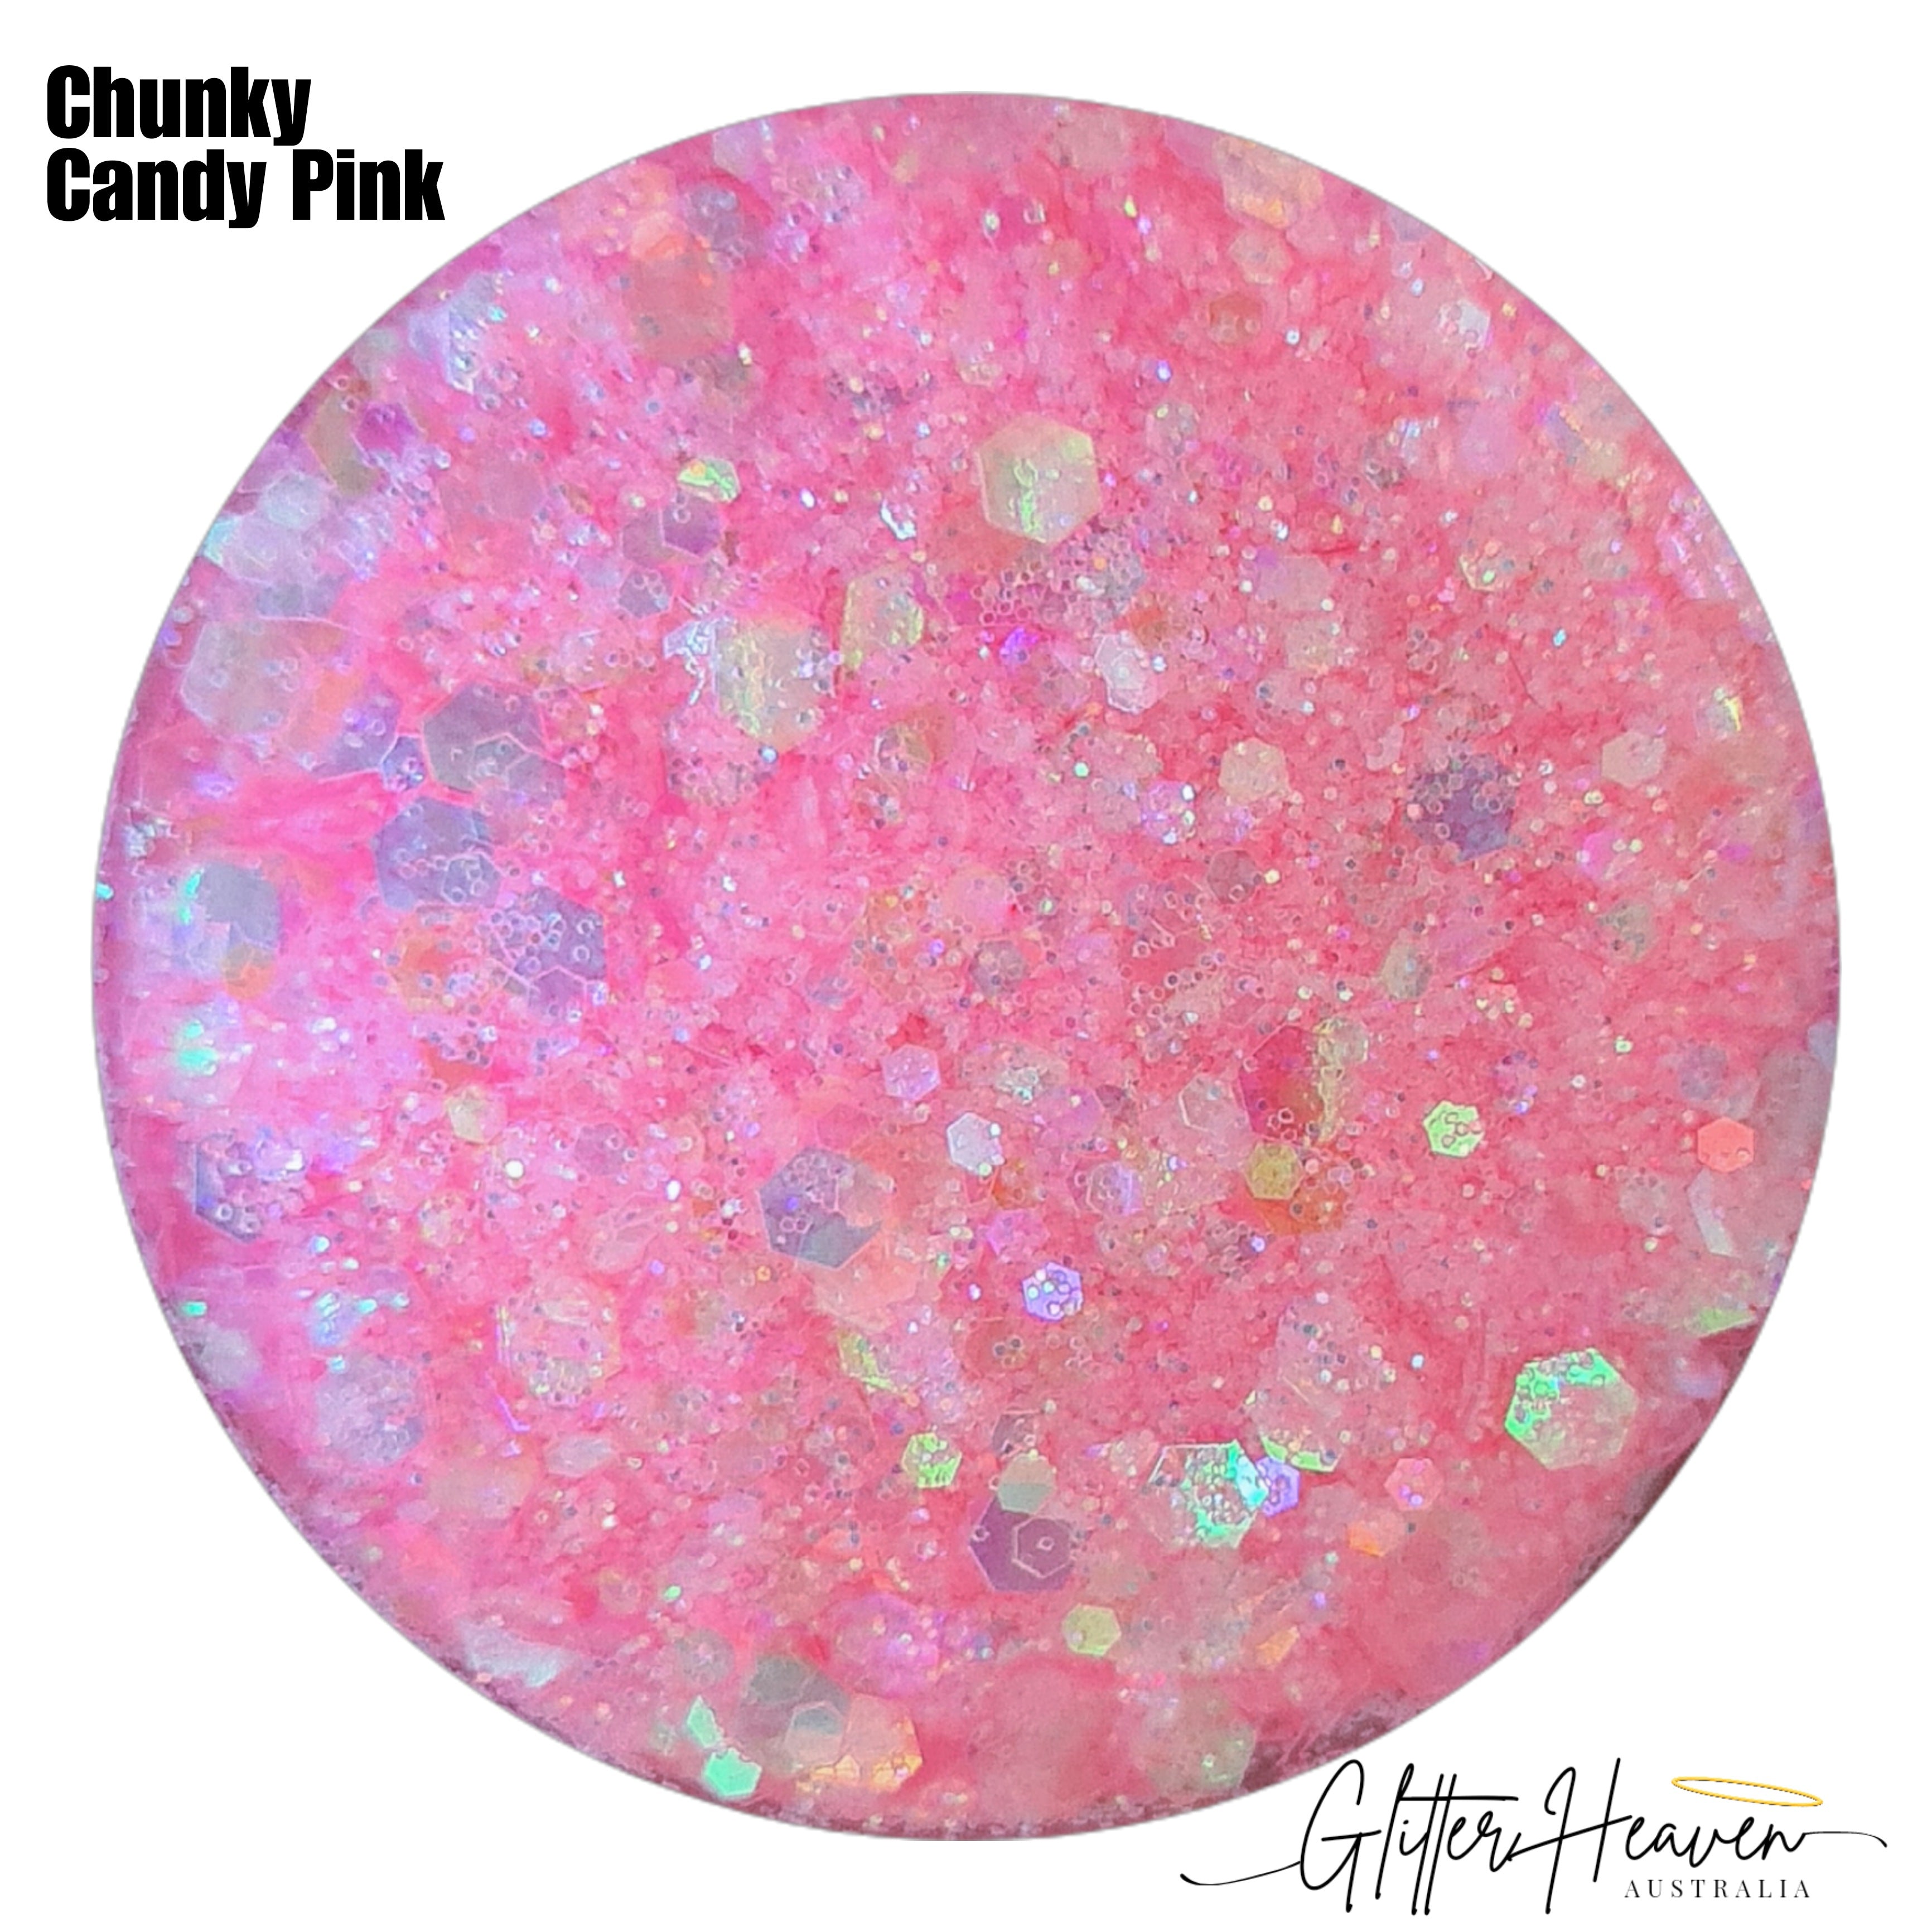 Chunky Candy Pink